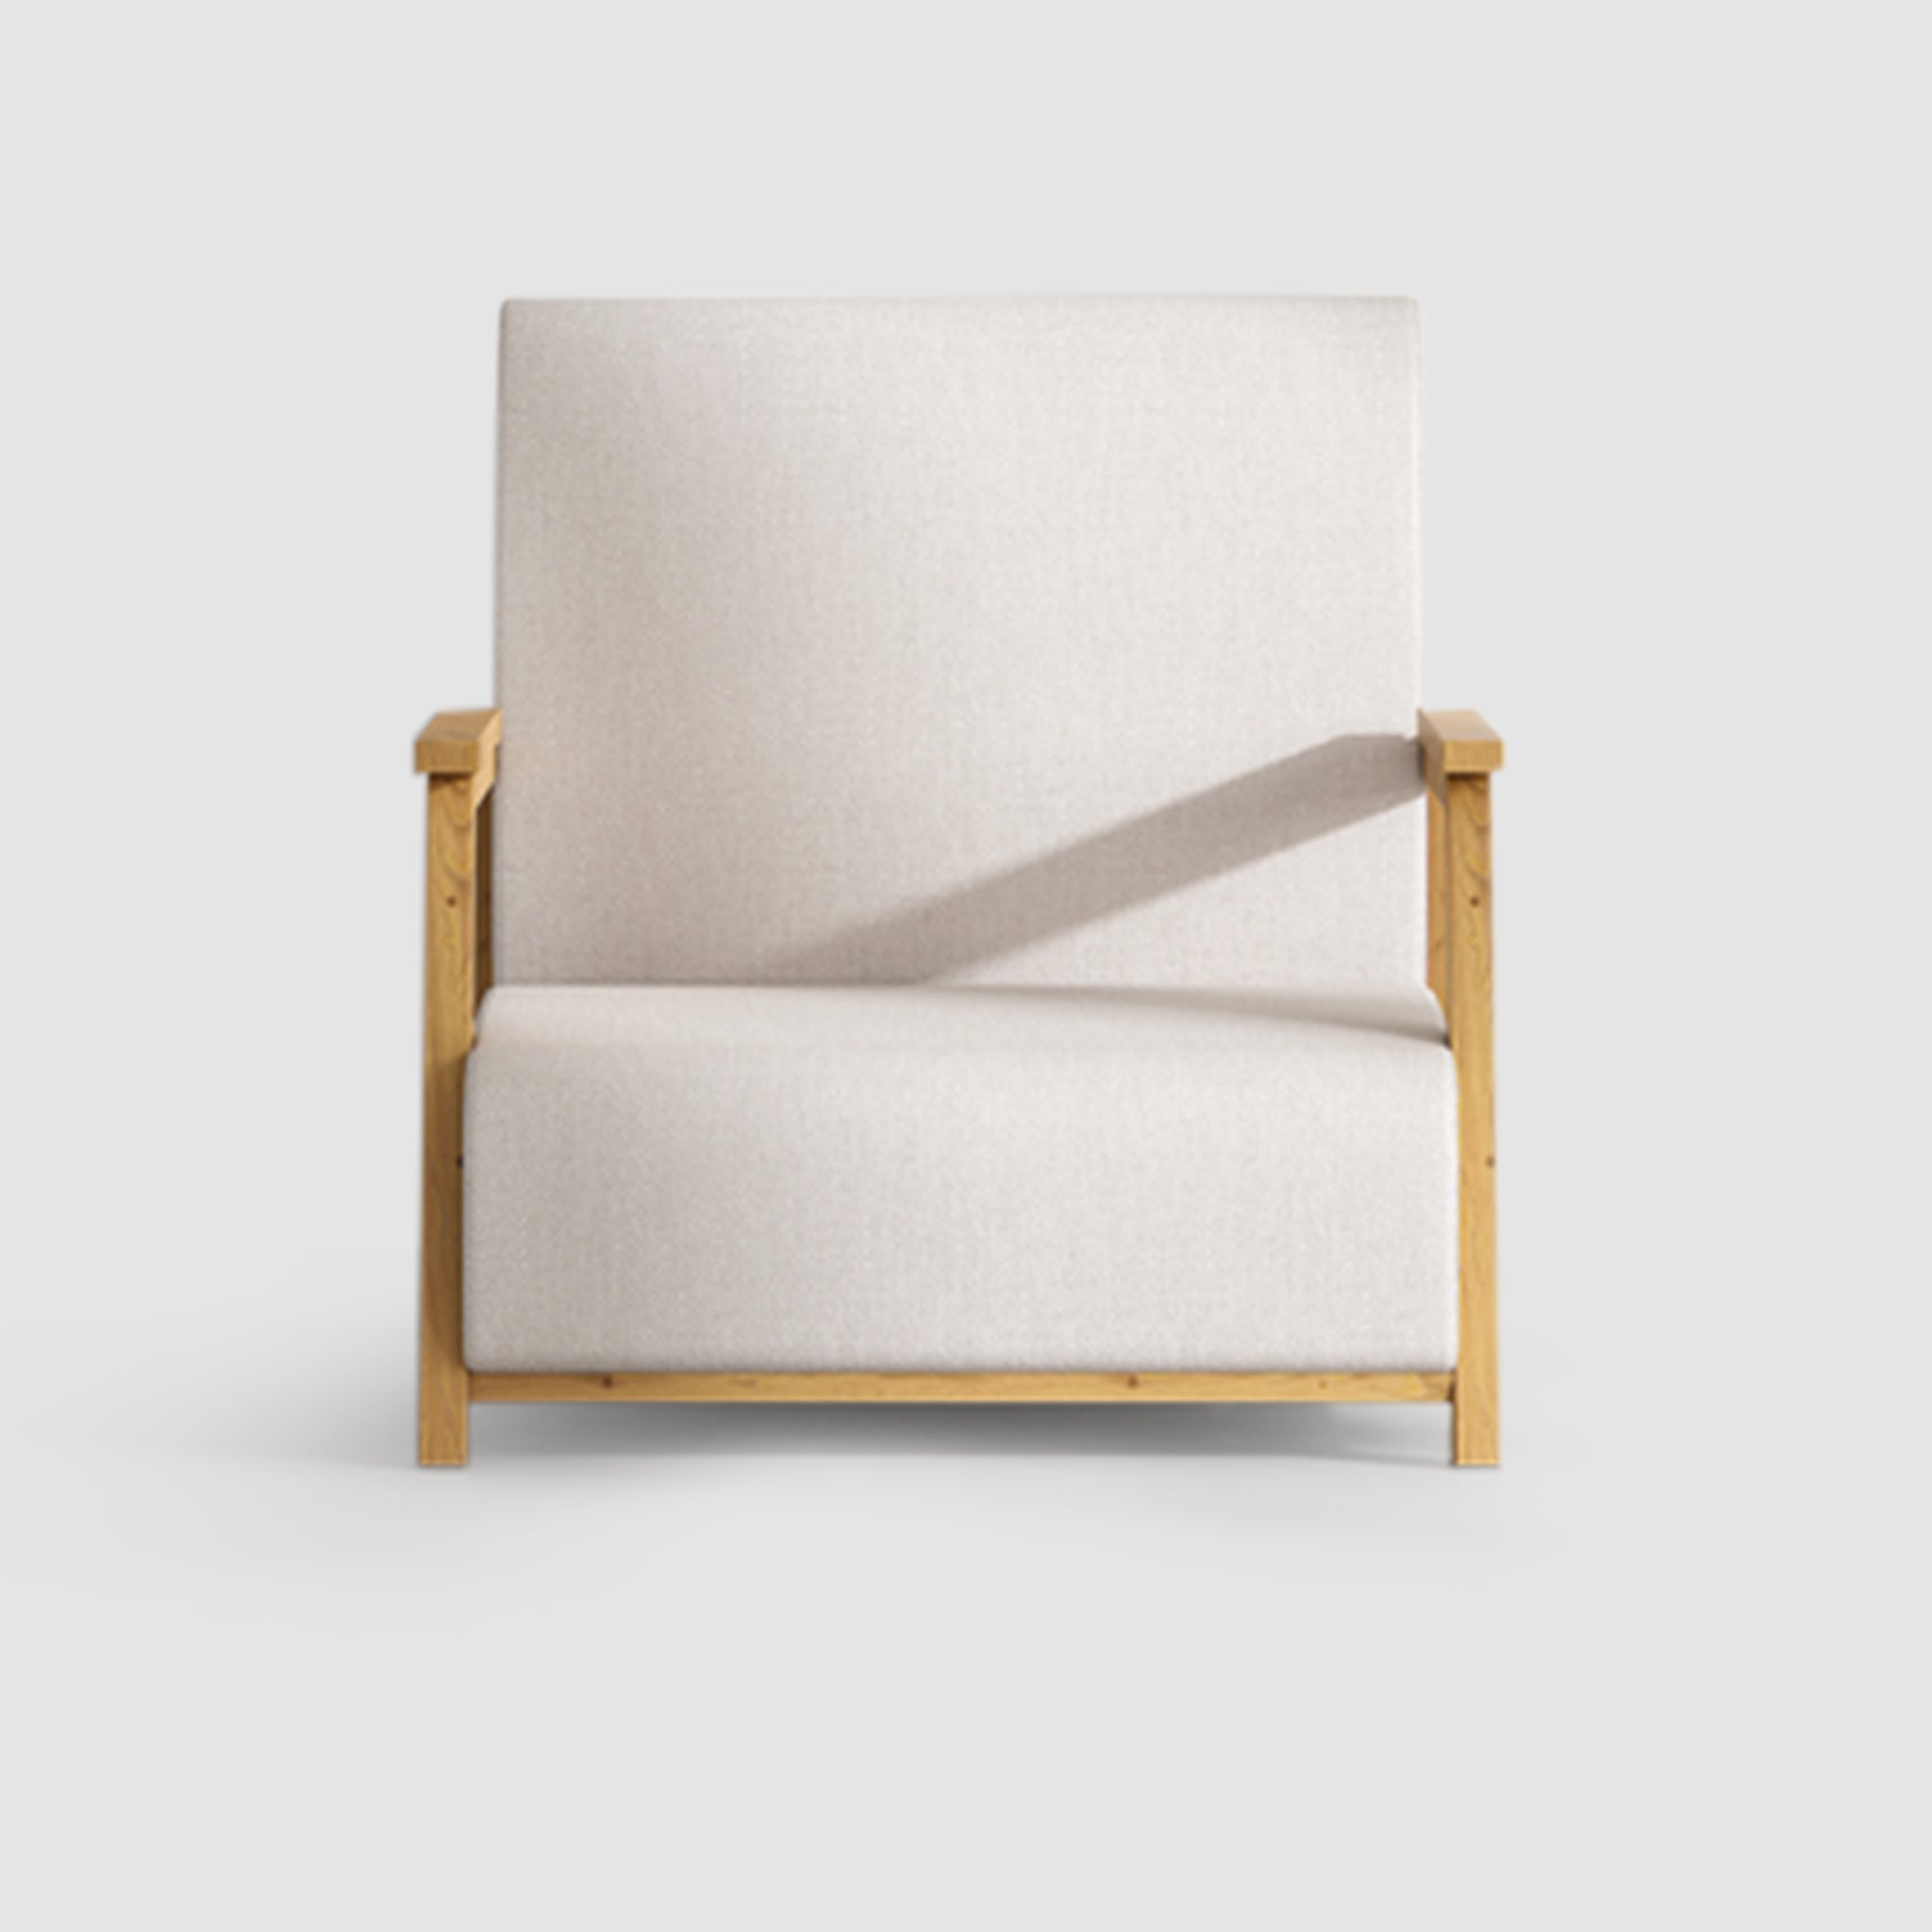 Front view of The Dixon Arm Accent Chair with minimalist design, featuring light beige upholstery and natural wood armrests.